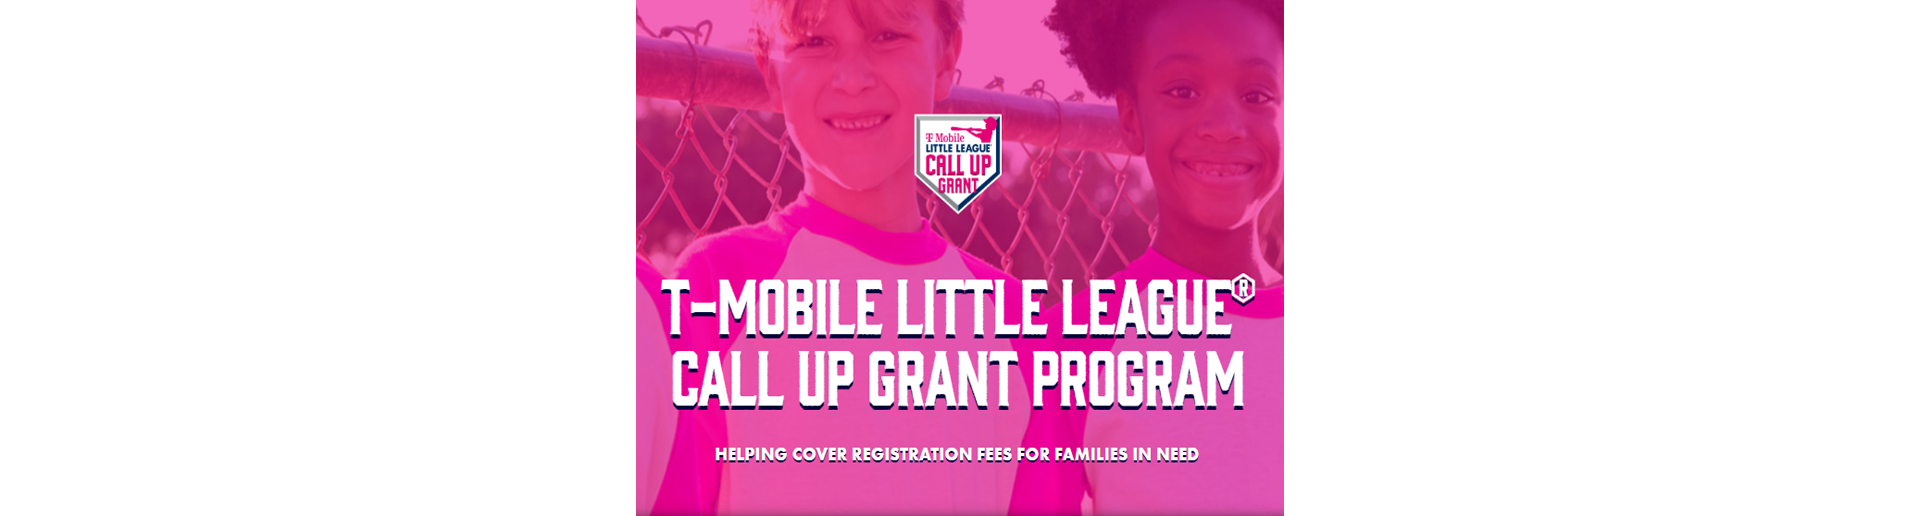 T-MOBILE Little League Call Up Grant